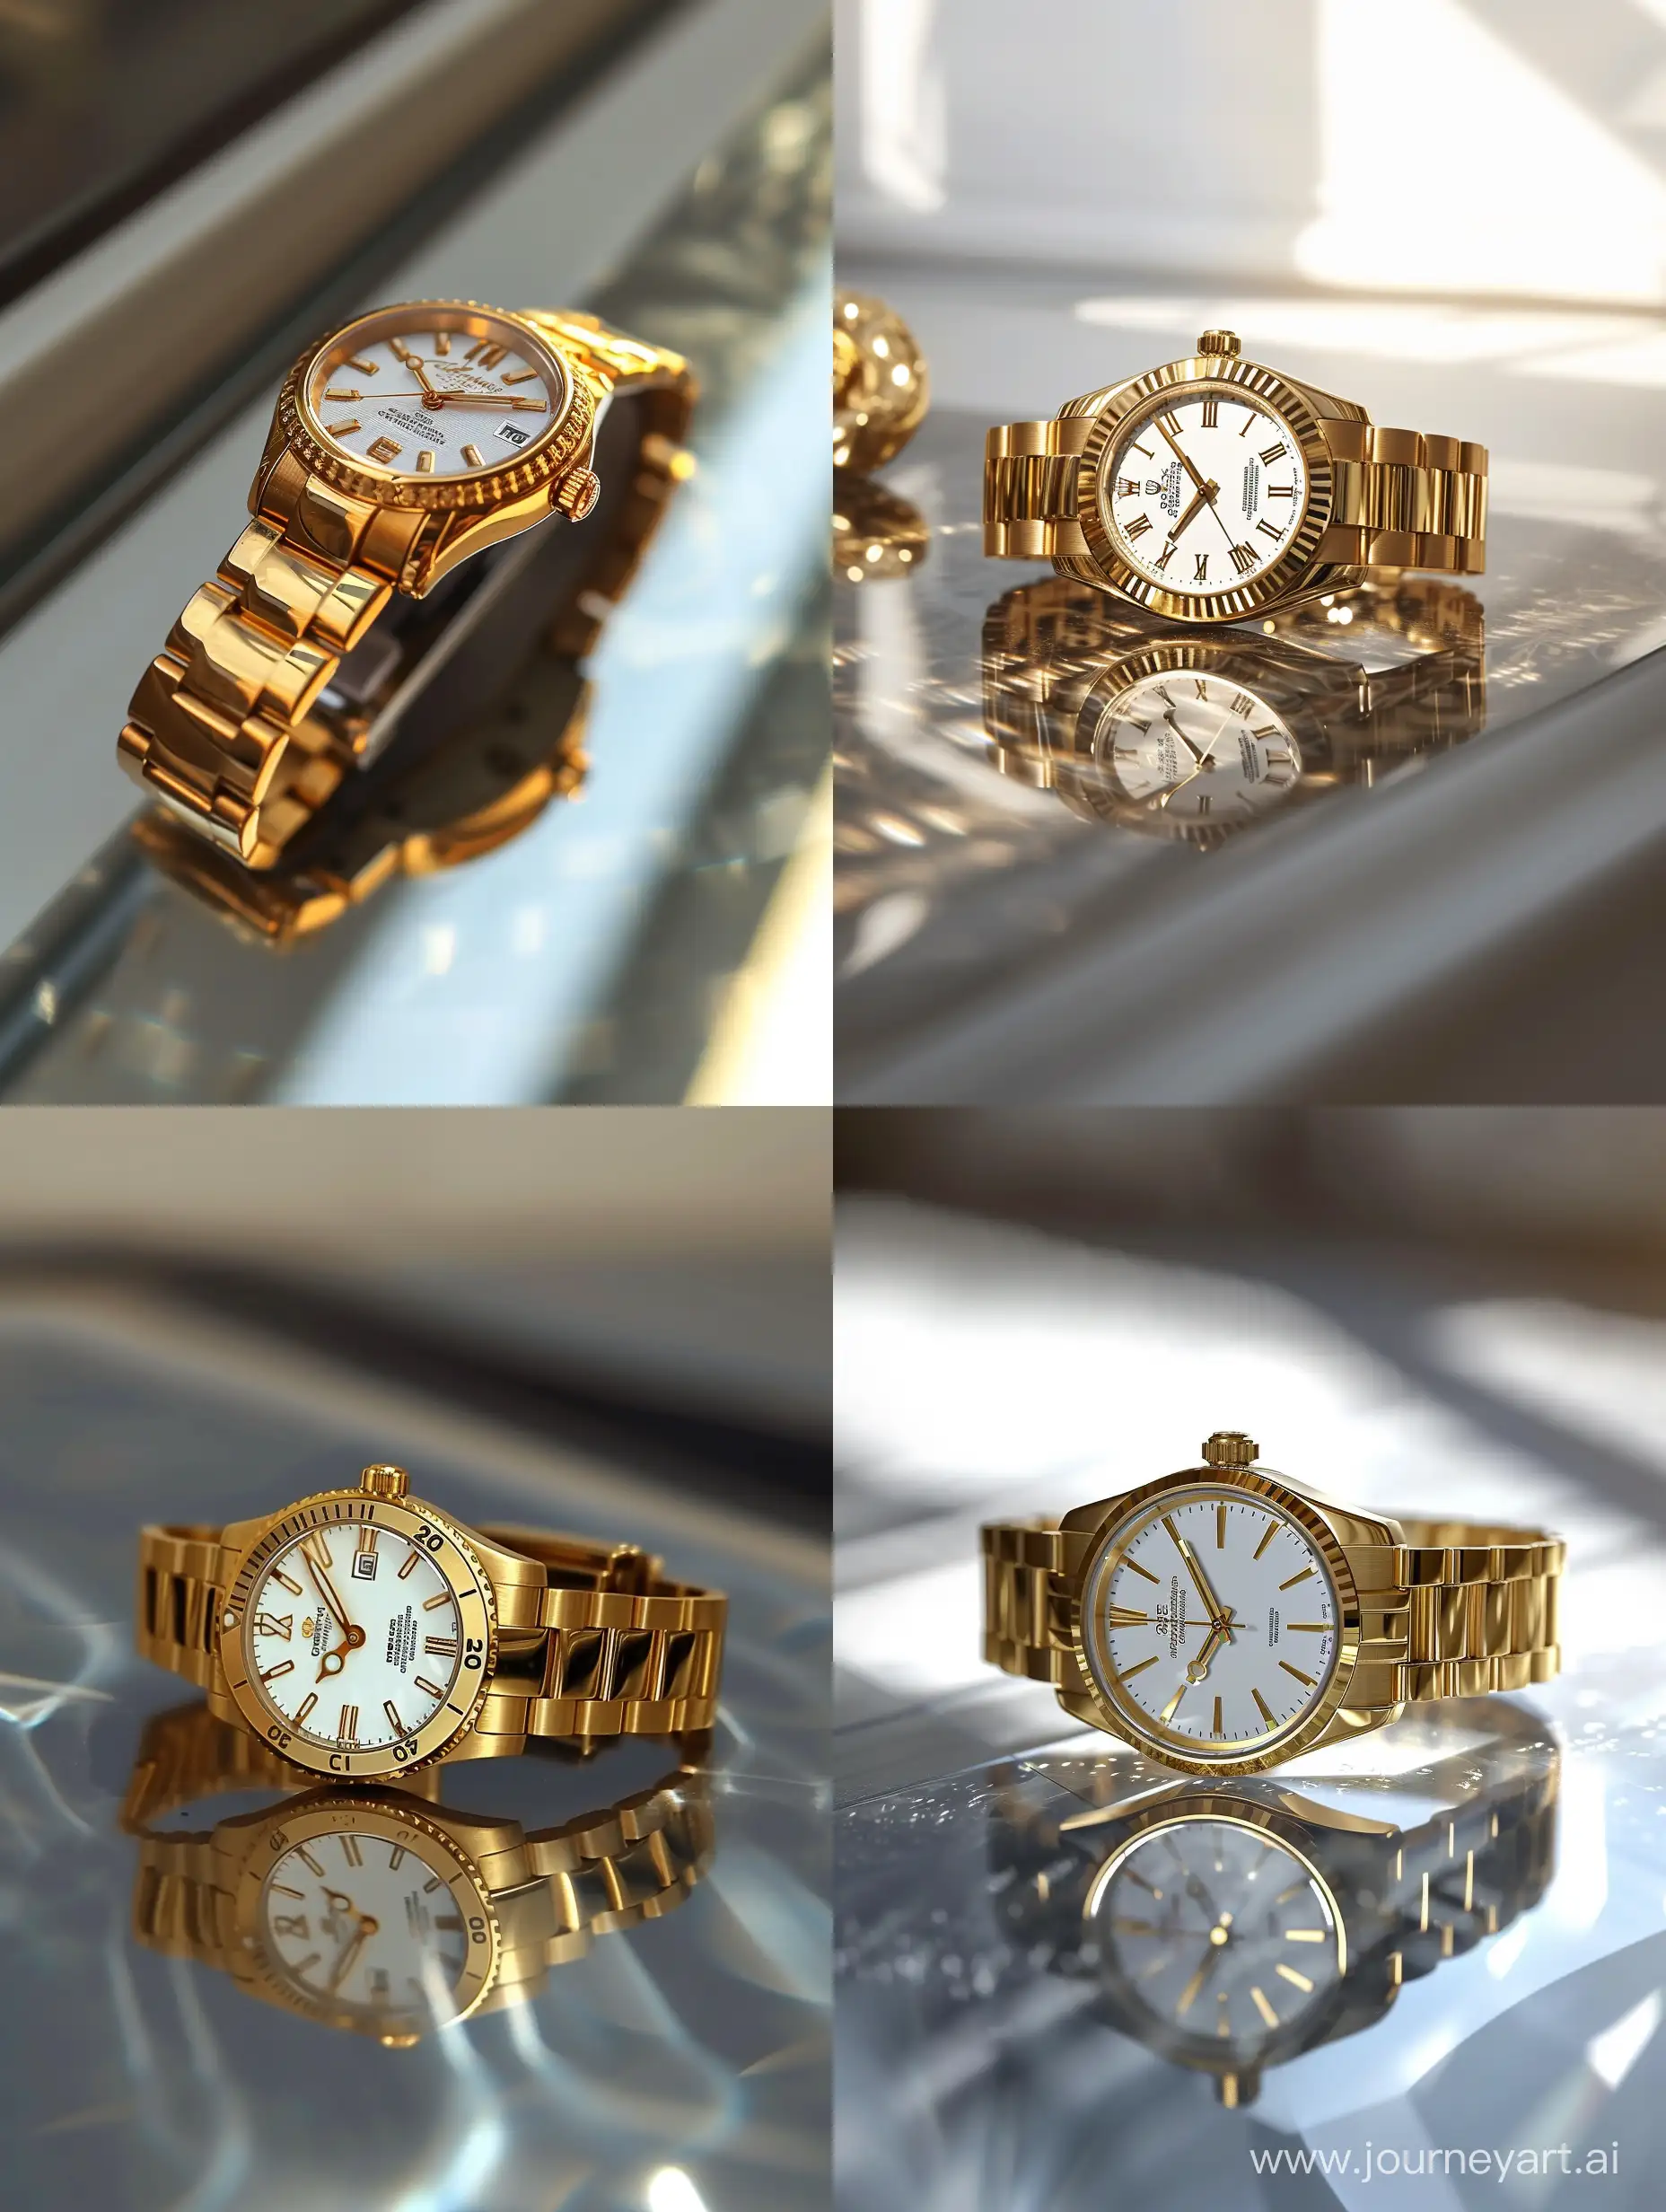 Create a high-resolution, realistic image of an elegant gold wristwatch with intricate detailing, positioned on a surface that reflects light. The watch should have a white dial, gold markings, and the brand name visibly inscribed